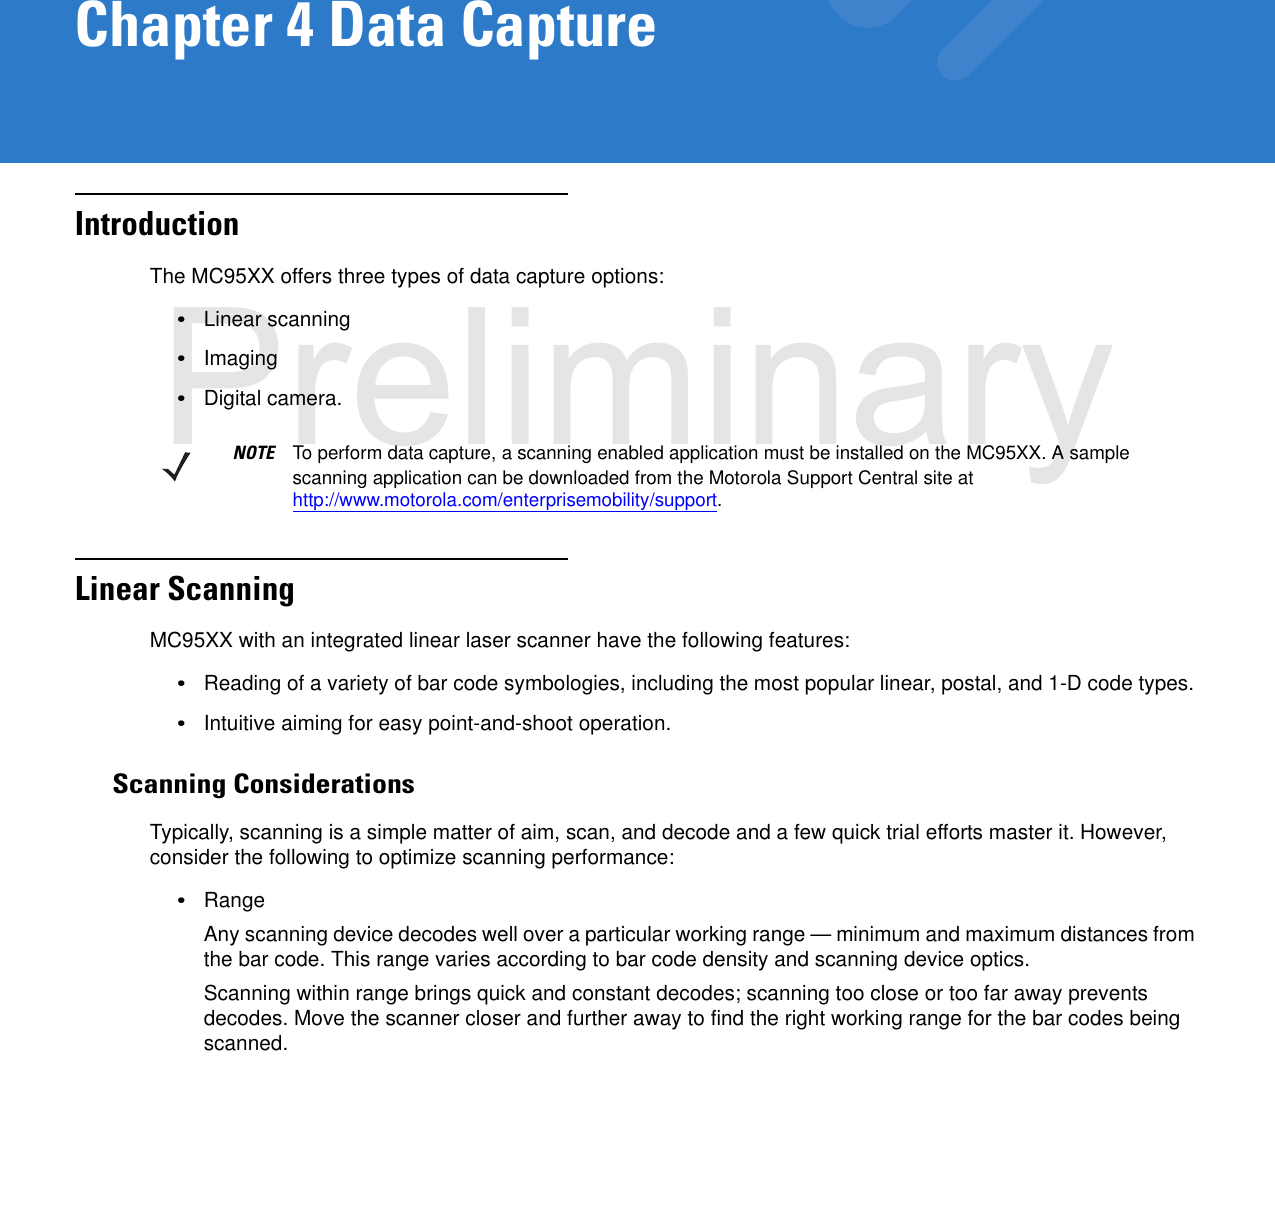 Chapter 4 Data CaptureIntroductionThe MC95XX offers three types of data capture options:•Linear scanning•Imaging•Digital camera.Linear ScanningMC95XX with an integrated linear laser scanner have the following features:•Reading of a variety of bar code symbologies, including the most popular linear, postal, and 1-D code types. •Intuitive aiming for easy point-and-shoot operation.Scanning ConsiderationsTypically, scanning is a simple matter of aim, scan, and decode and a few quick trial efforts master it. However, consider the following to optimize scanning performance:•RangeAny scanning device decodes well over a particular working range — minimum and maximum distances from the bar code. This range varies according to bar code density and scanning device optics.Scanning within range brings quick and constant decodes; scanning too close or too far away prevents decodes. Move the scanner closer and further away to find the right working range for the bar codes being scanned. NOTE To perform data capture, a scanning enabled application must be installed on the MC95XX. A sample scanning application can be downloaded from the Motorola Support Central site at http://www.motorola.com/enterprisemobility/support.Preliminary